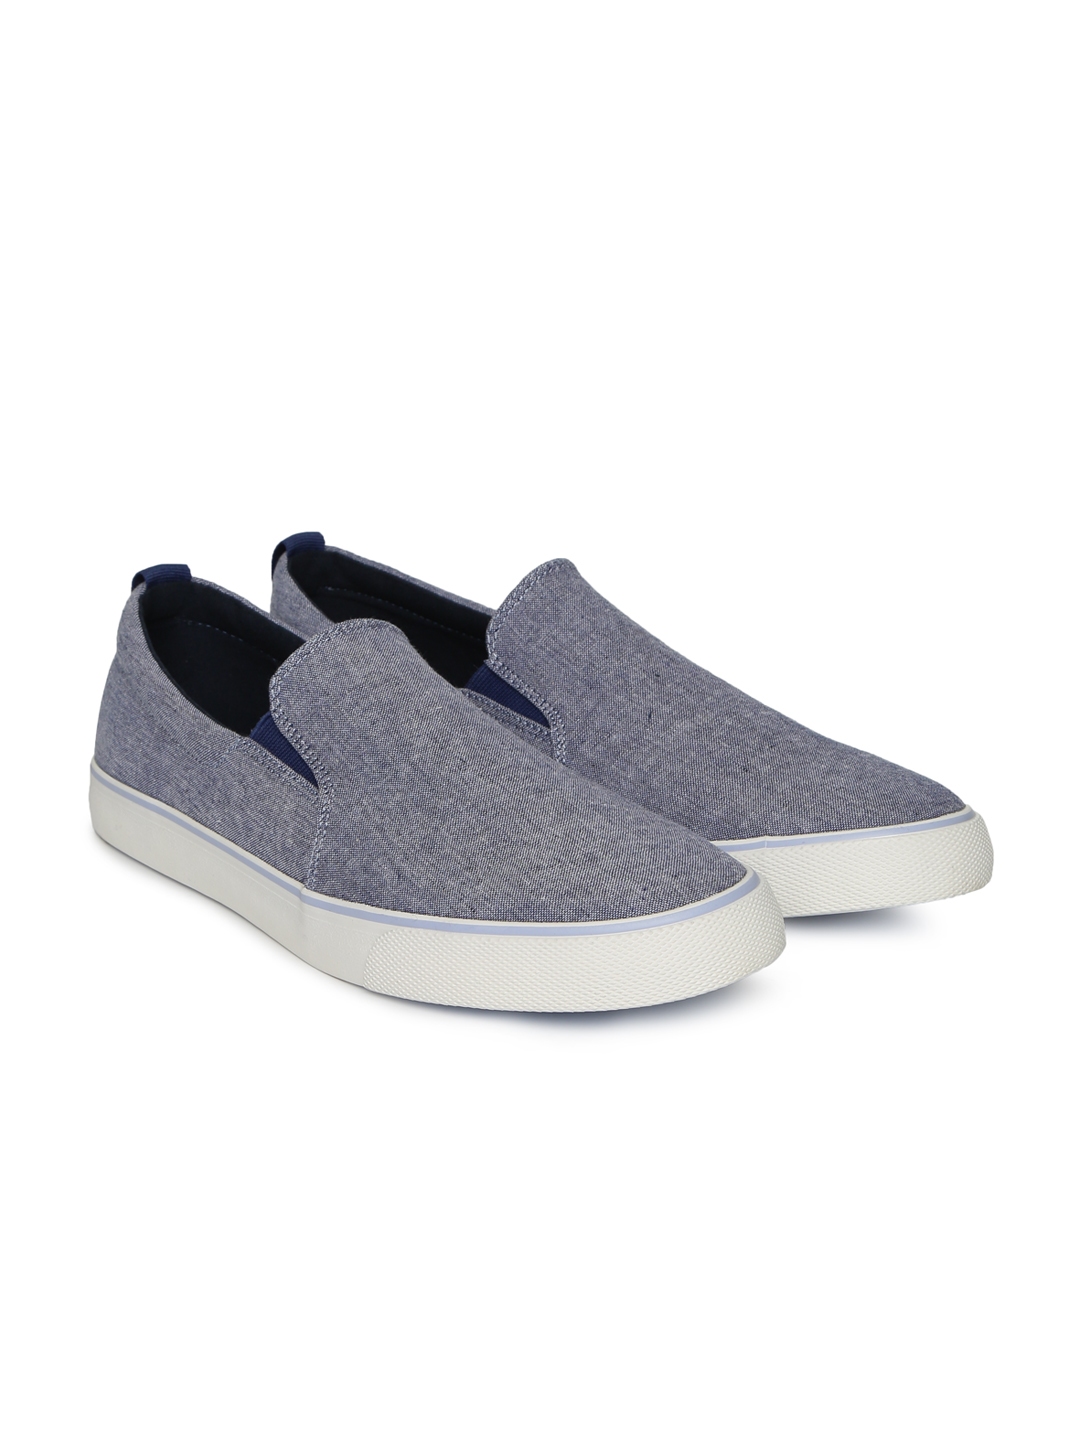 Buy United Colors Of Benetton Men Grey Slip On Sneakers - Casual Shoes ...